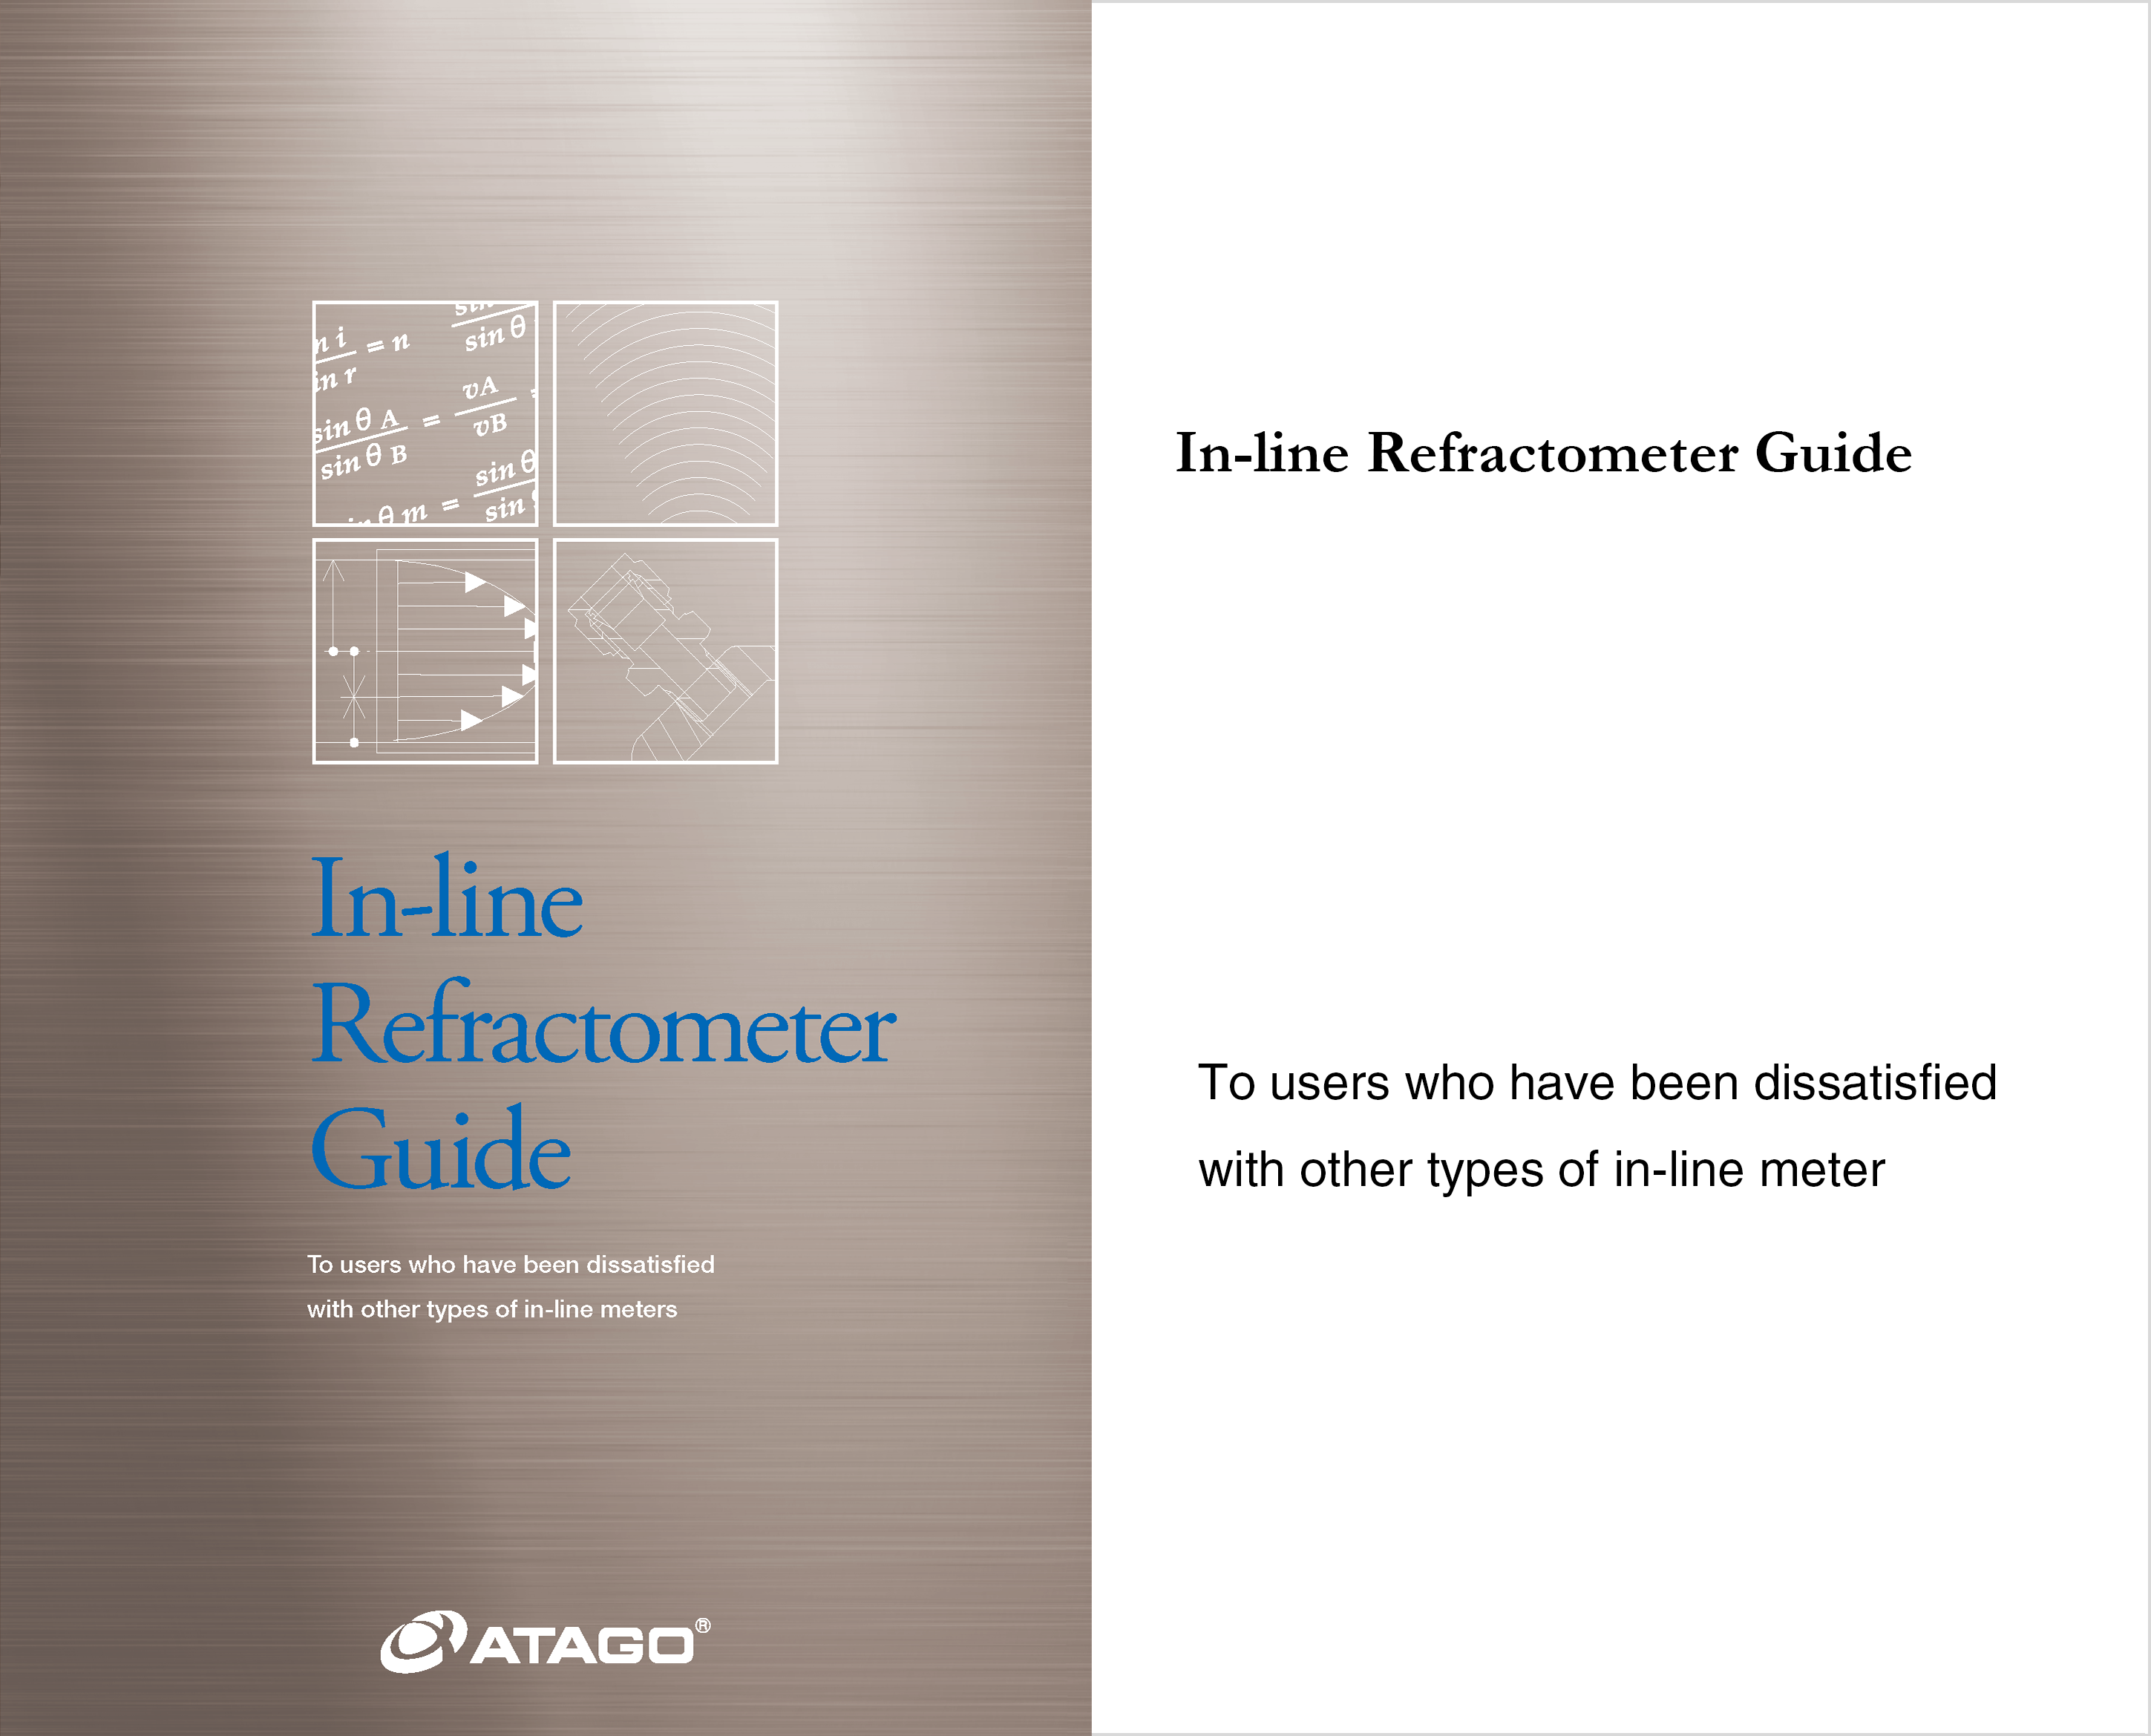 In-line Refractometer Guide